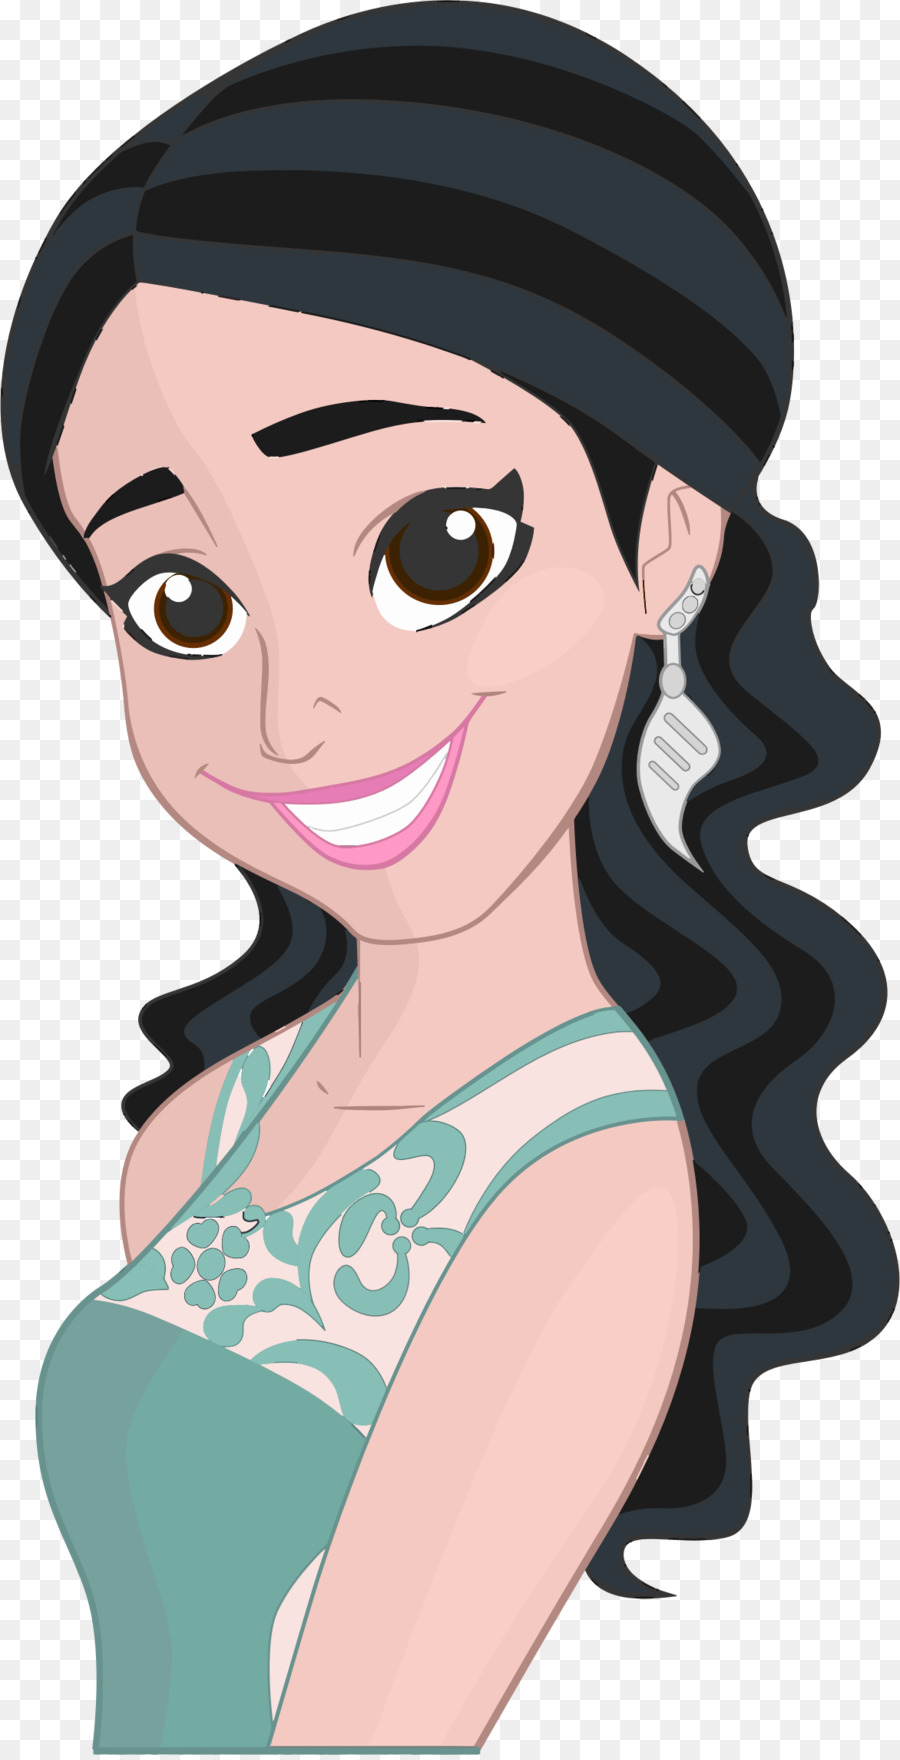 Smile Woman Clip art - happy women'.s day png download - 1172*2286 - Free Transparent  png Download.